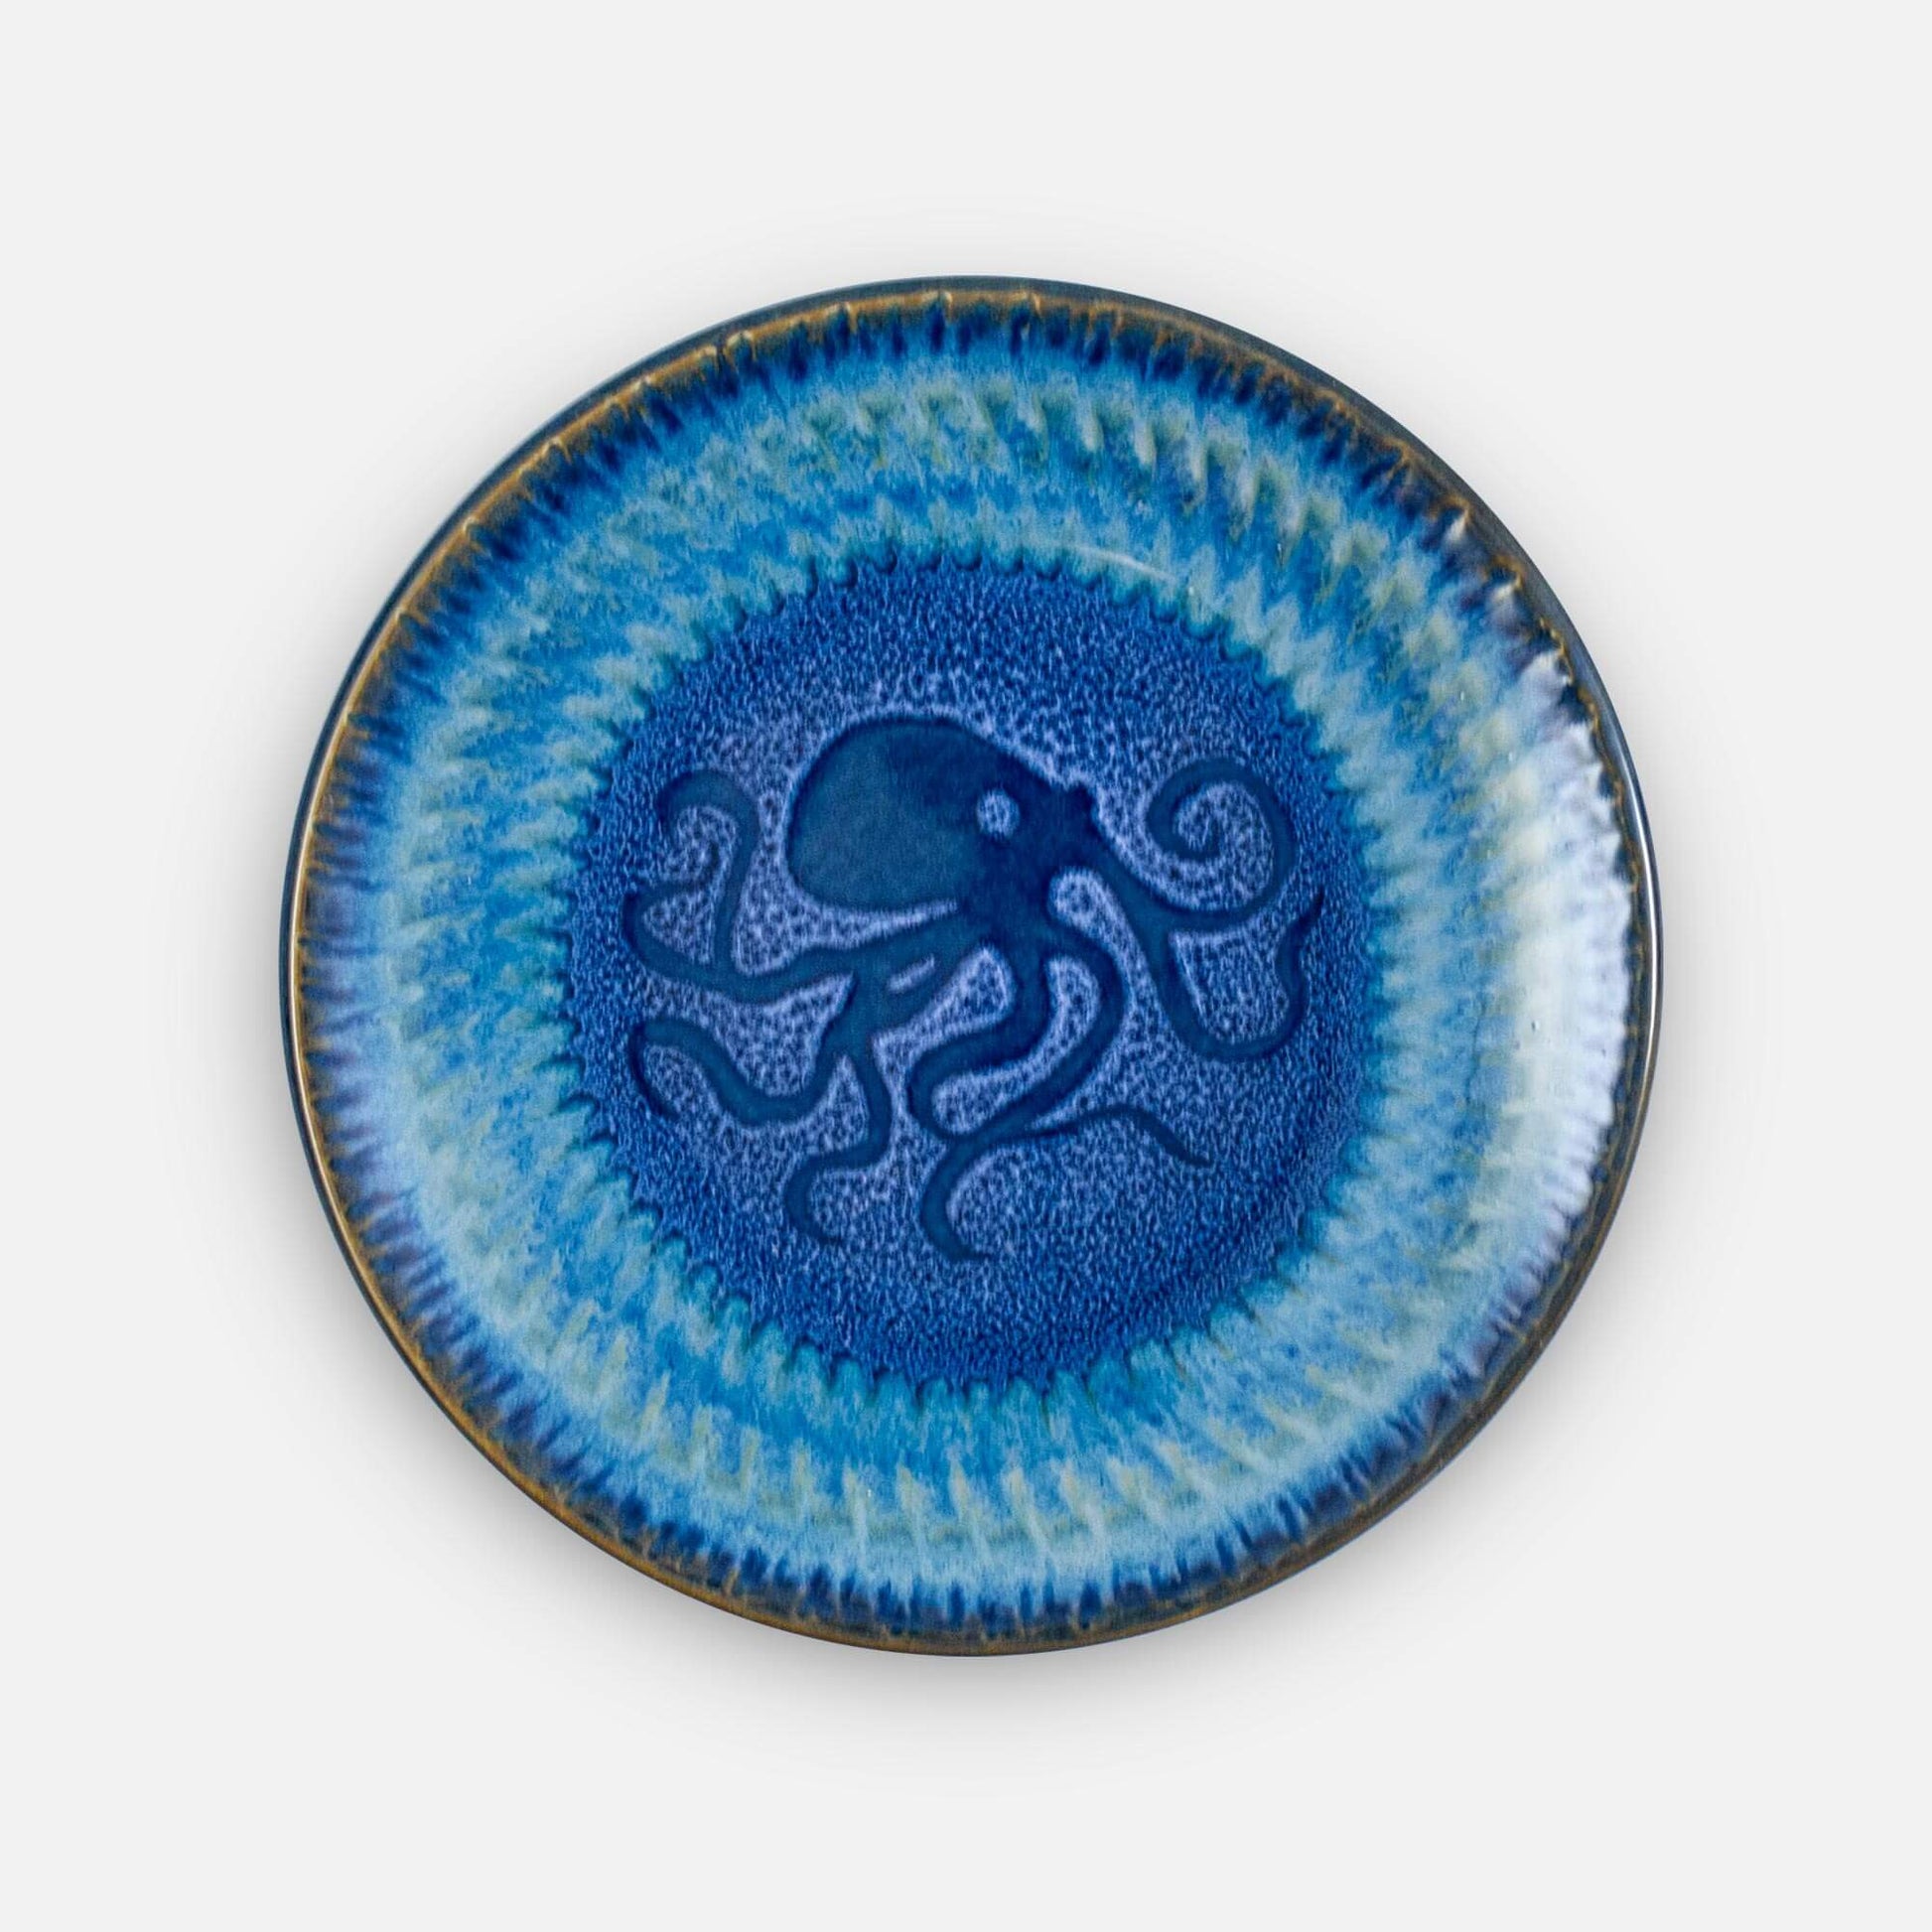 Handmade Pottery Rimless Dessert Plate made by Georgetown Pottery in Maine in Blue Octopus pattern